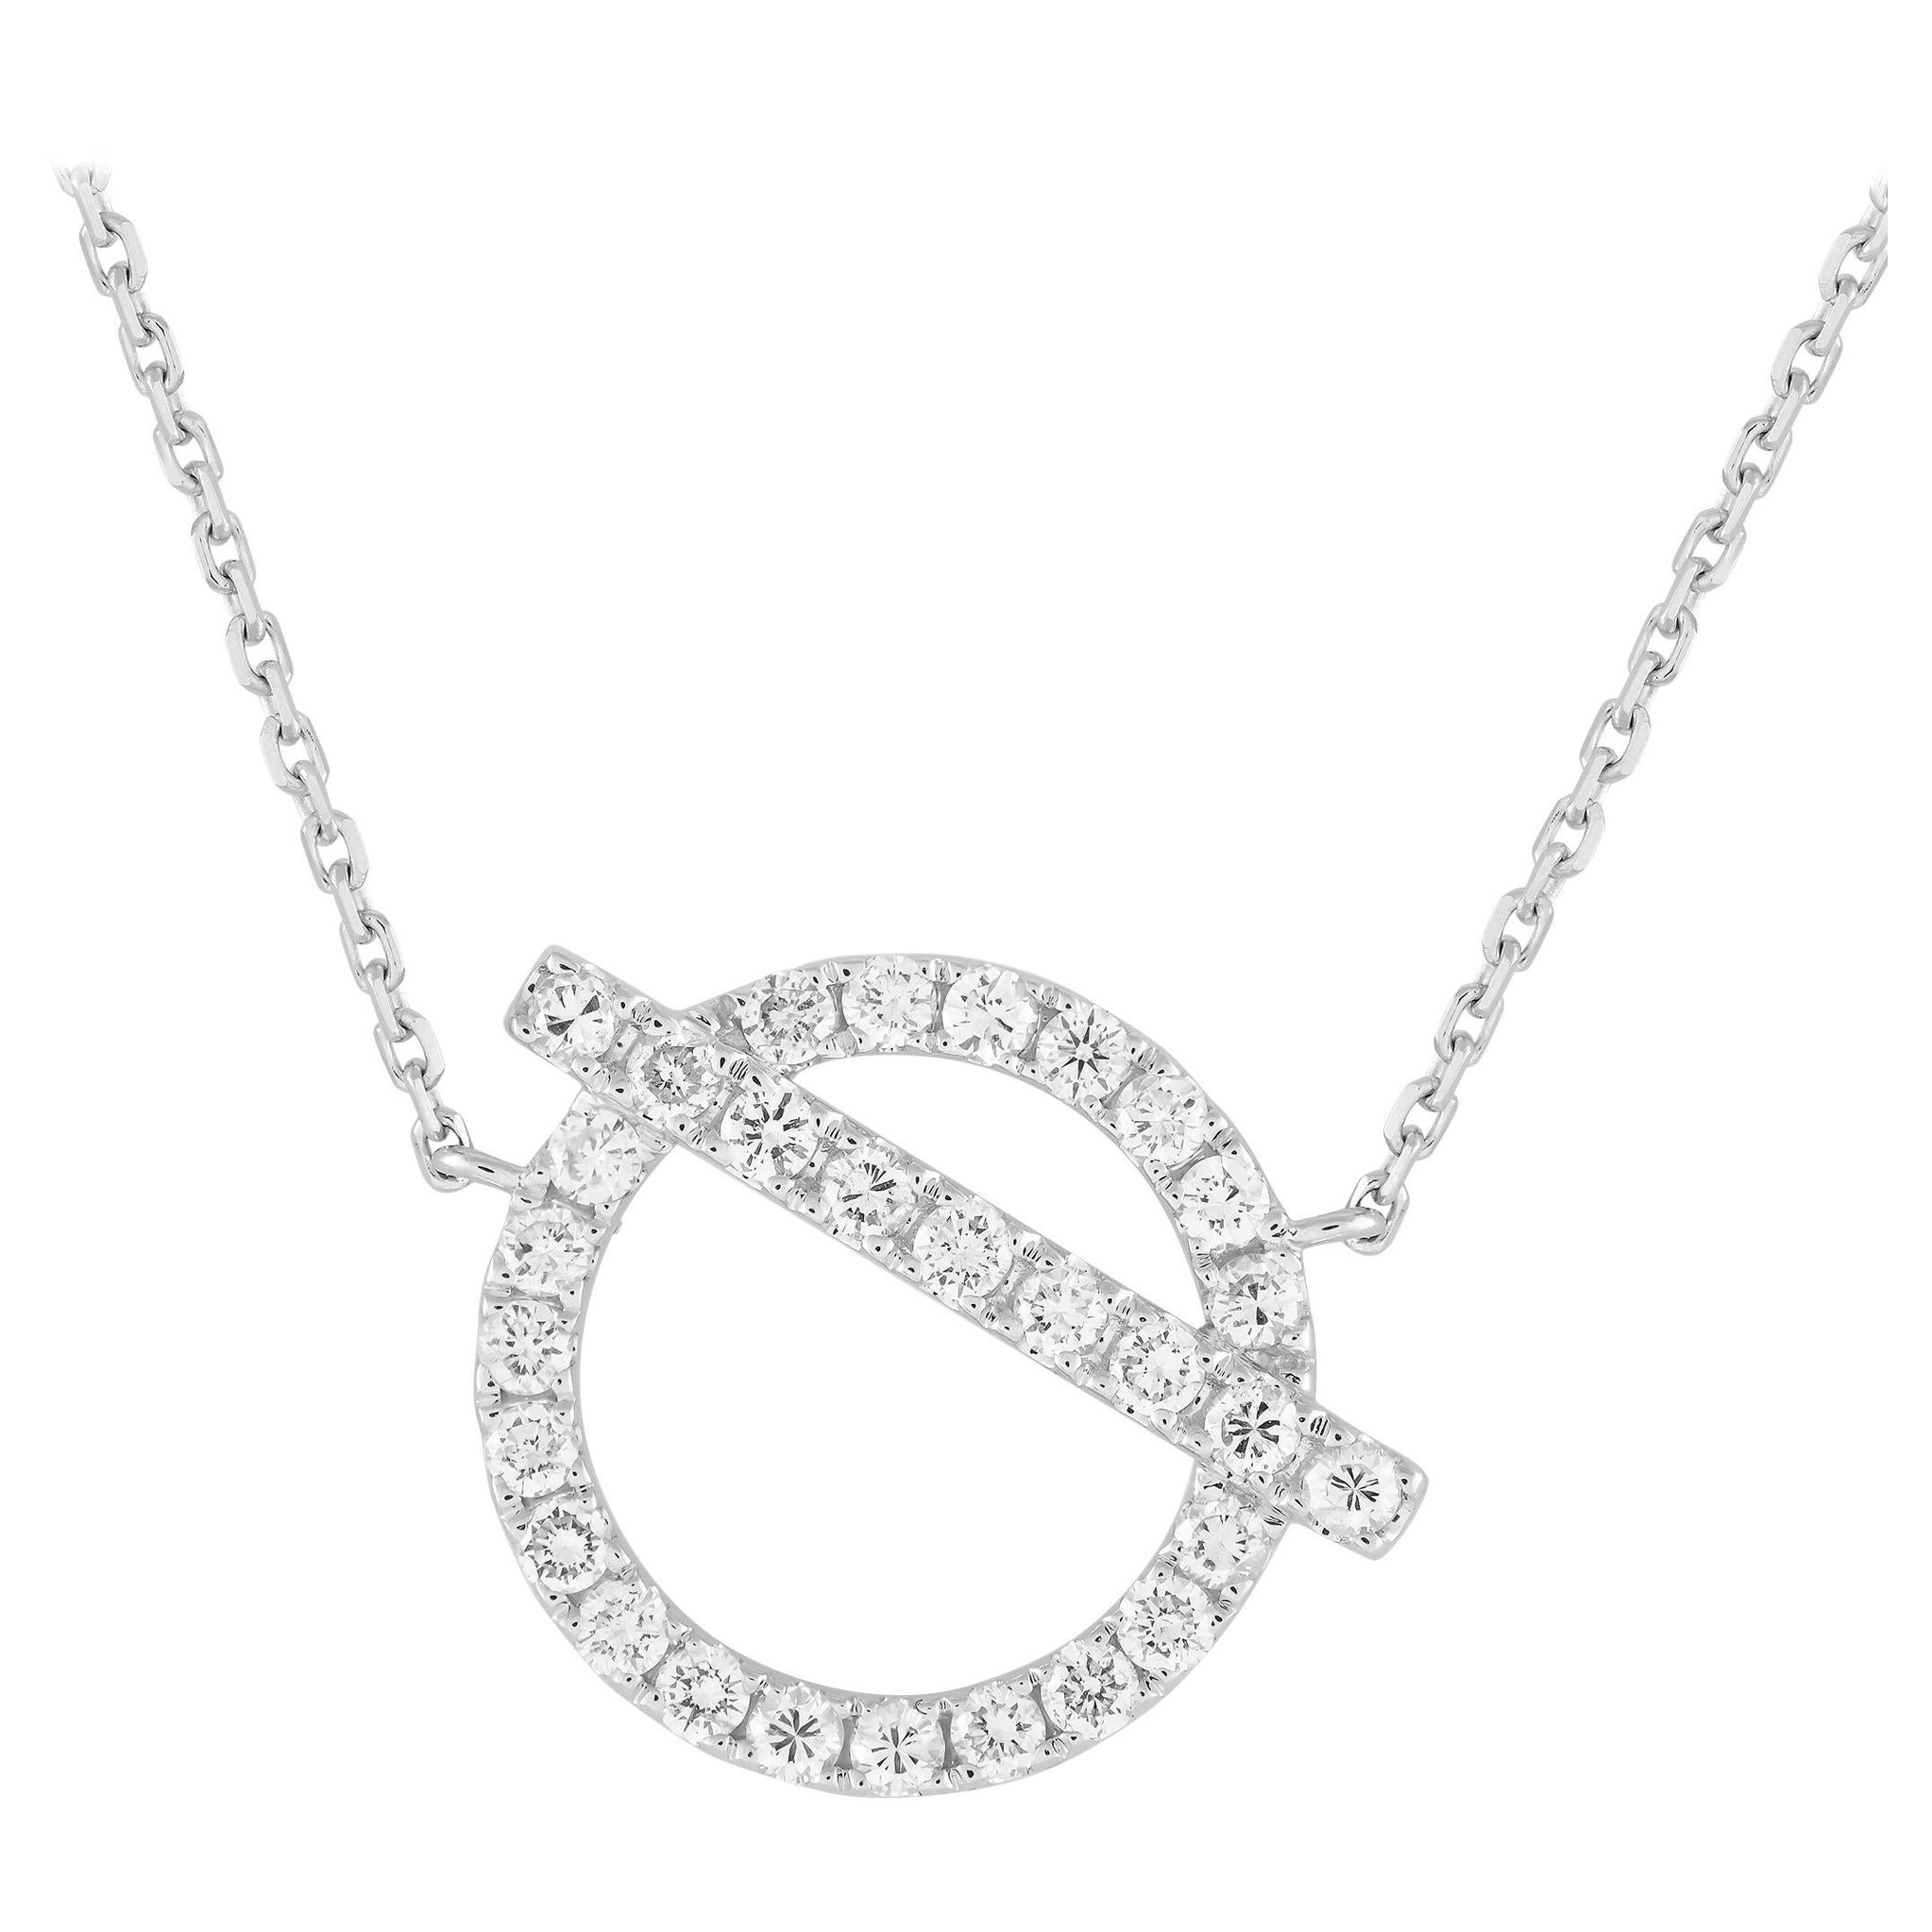 18K White Gold 0.62ct Diamond Necklace ANK-17871 For Sale